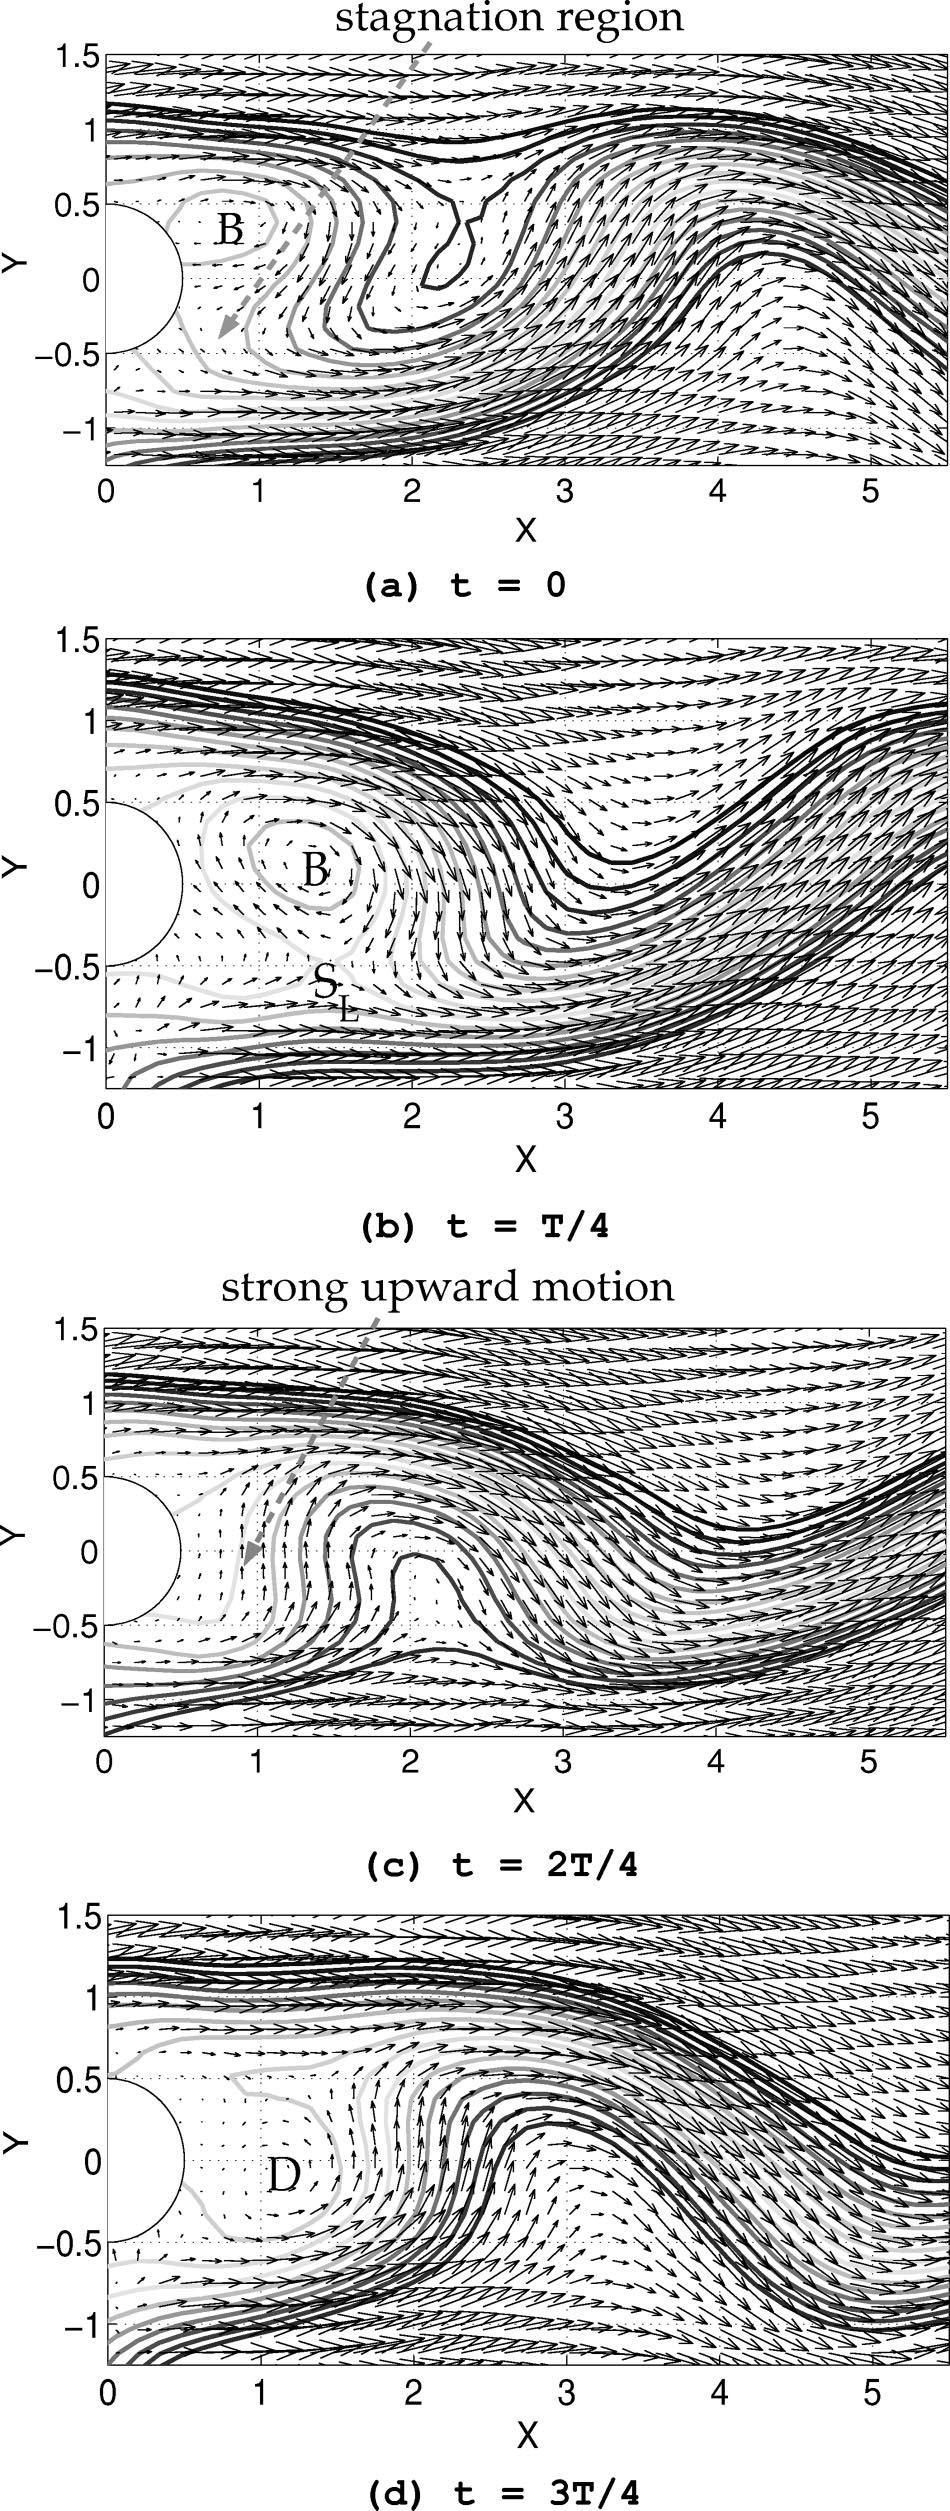 Velocity vectors and streamlines at out-of-plume position for Re 85 and Ri 1.0 obtained by using HPV technique. B and D are circulation areas at the upper and lower halves of the wake.